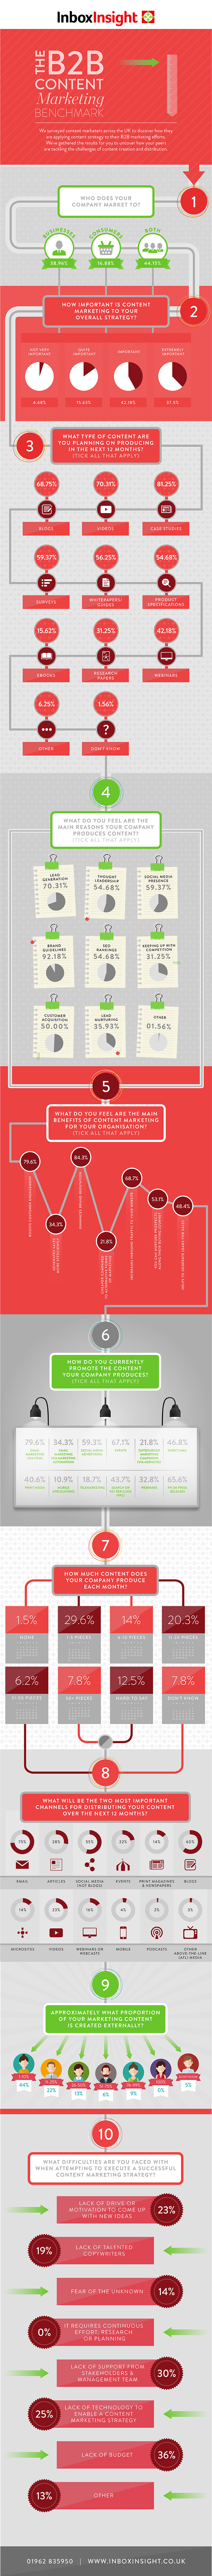 The B2B Content Marketing Benchmark (Infographic)